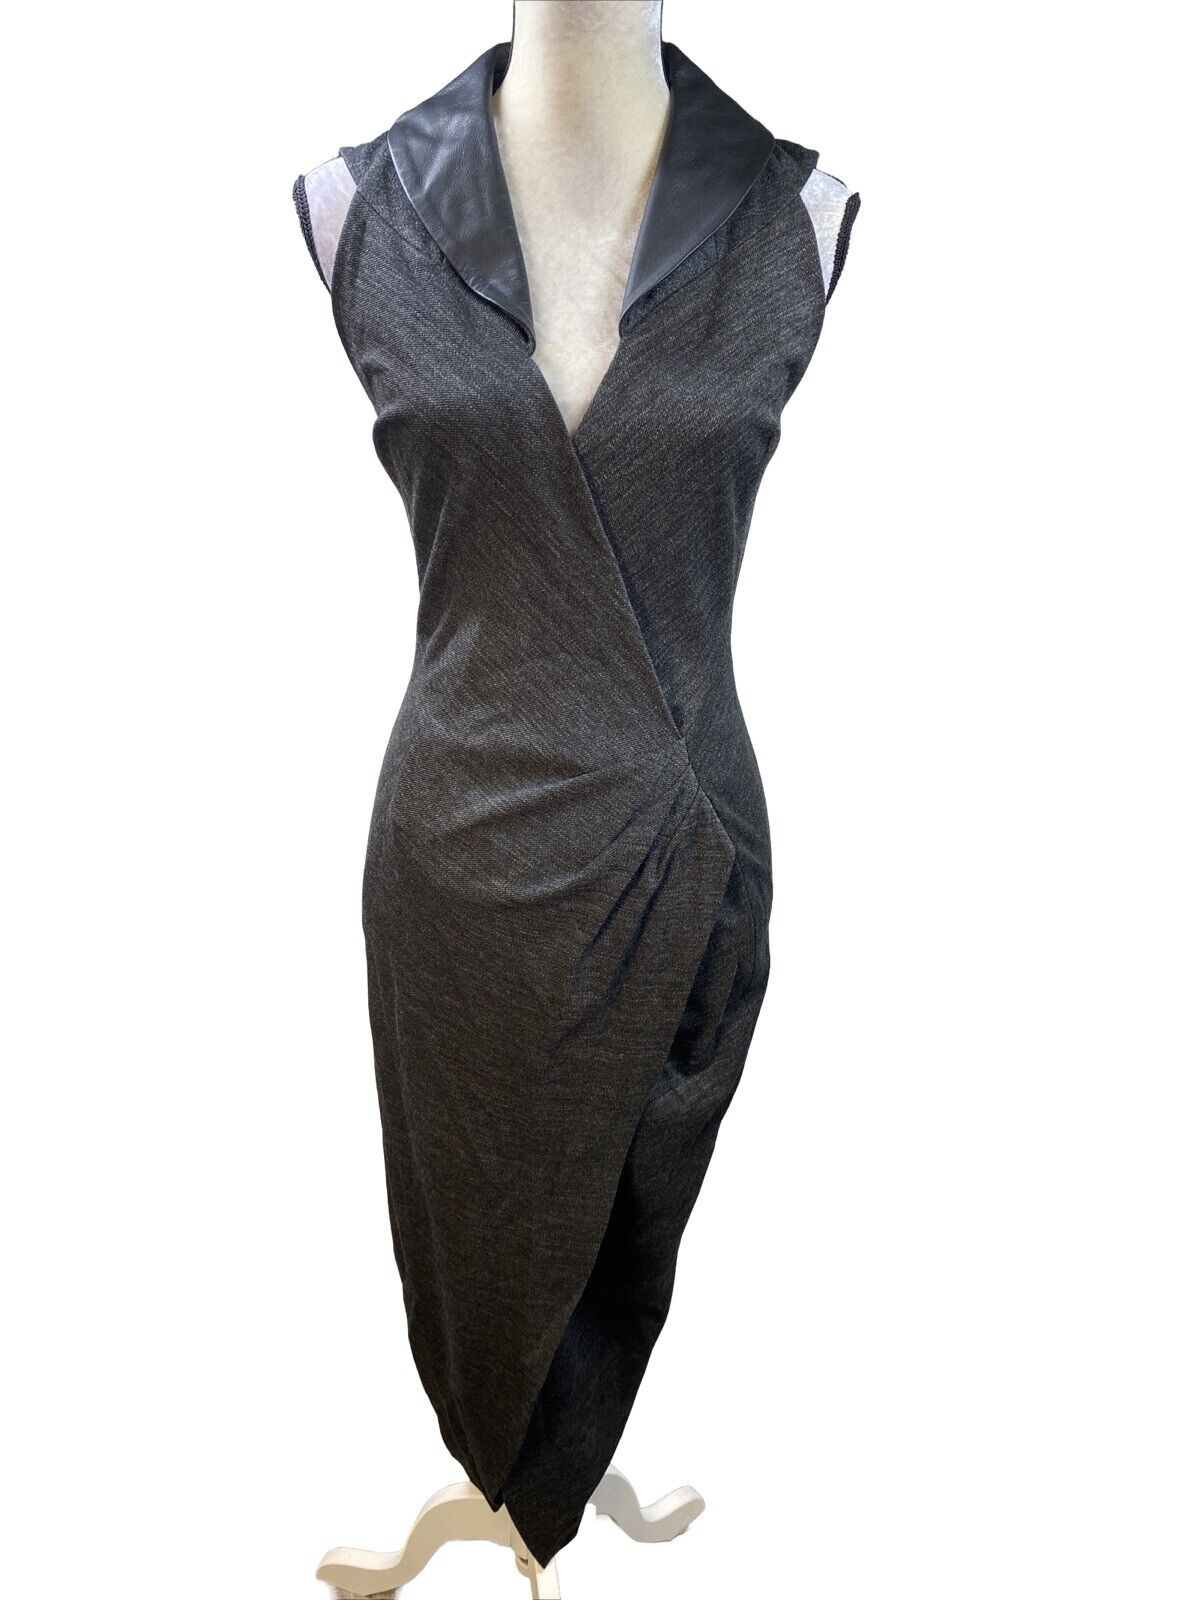 NEW Tt Collection Women's Charcoal Gray Kadie Leather Trim Dress - S